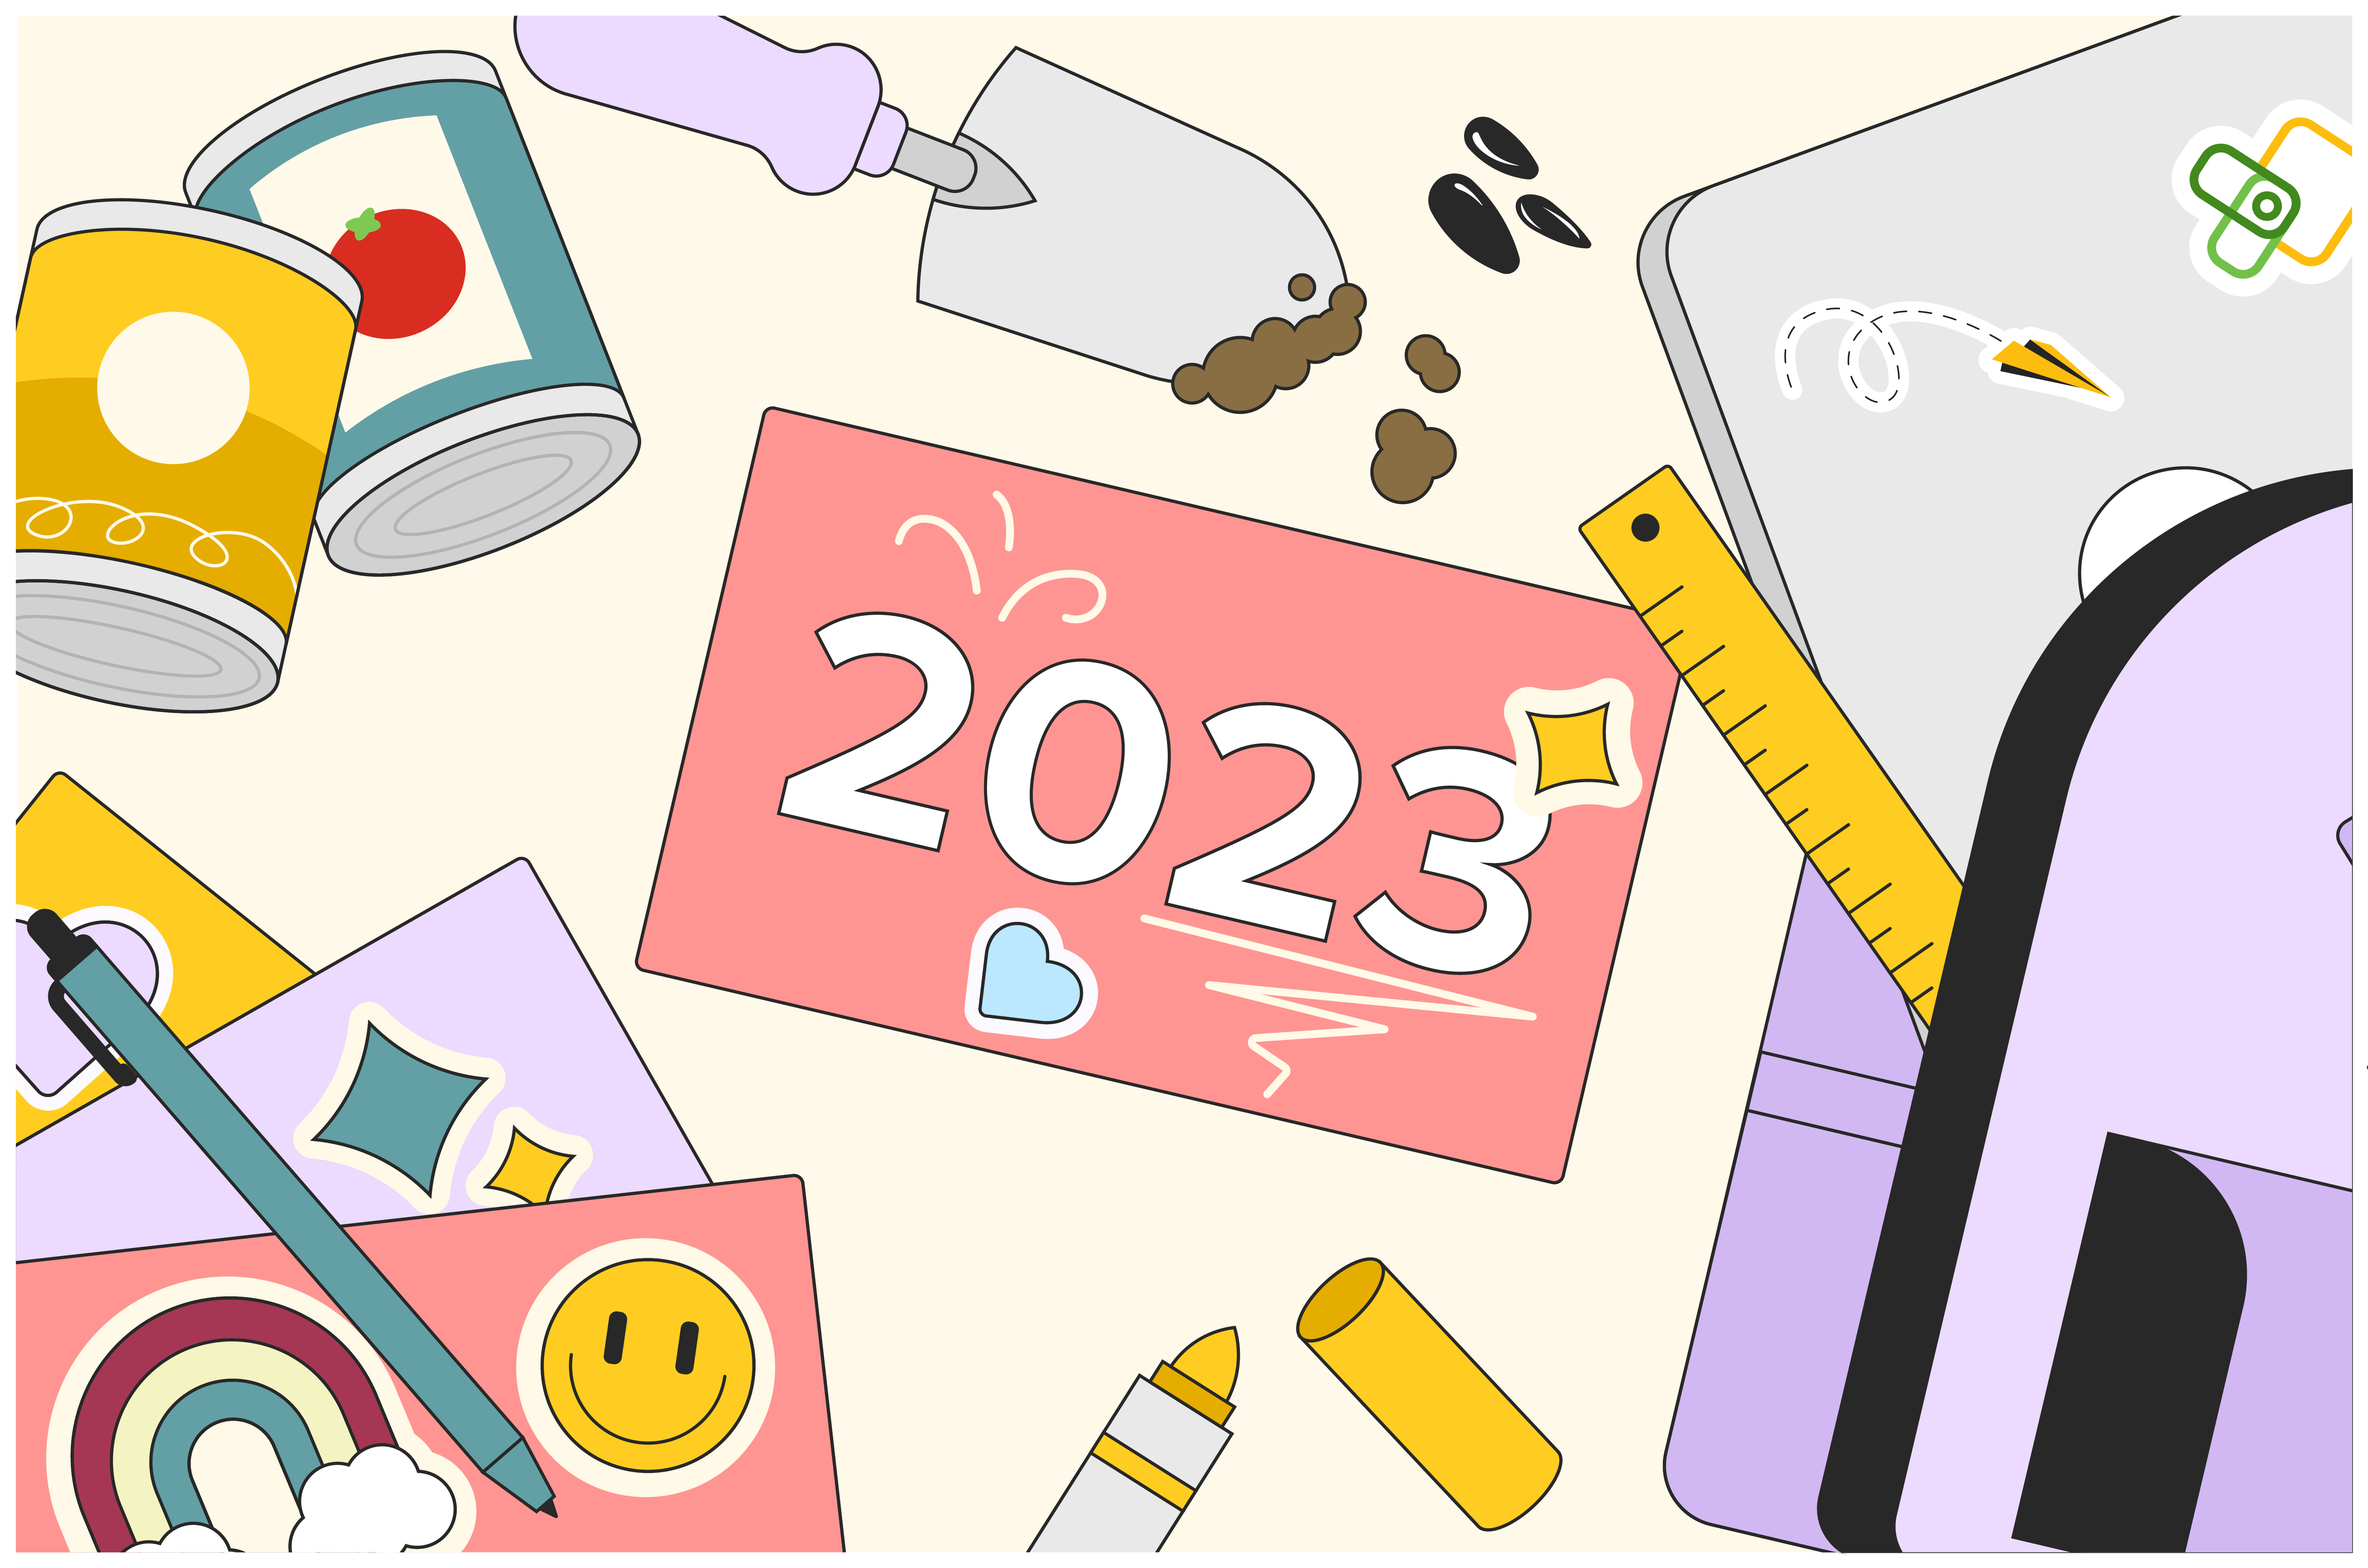 A card thats written 2023, surrounded by various stationery items such as pens, paper, a ruler, markers, and cans.